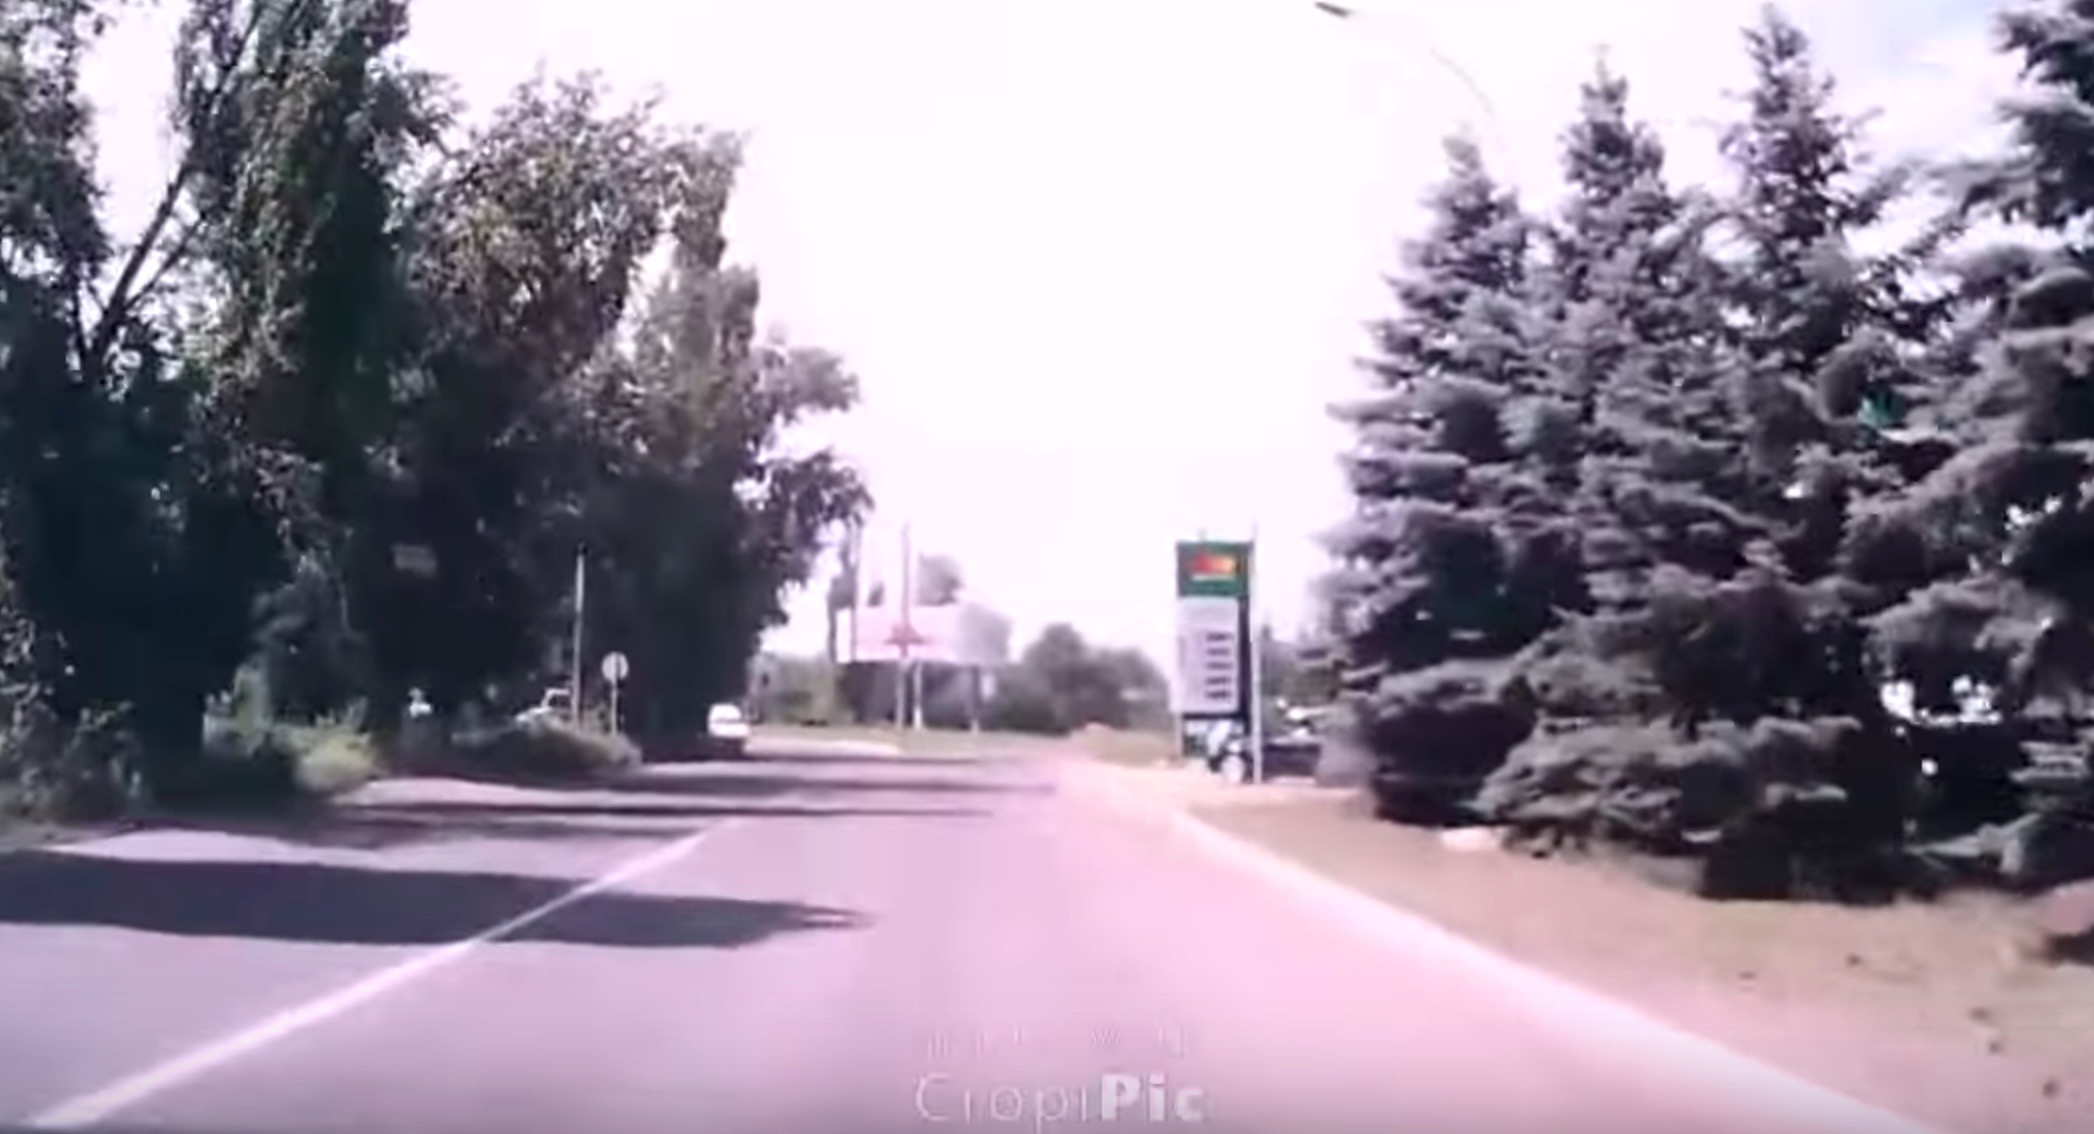 View from video, in which the fuel station, roundabout, and lines of trees are all visible